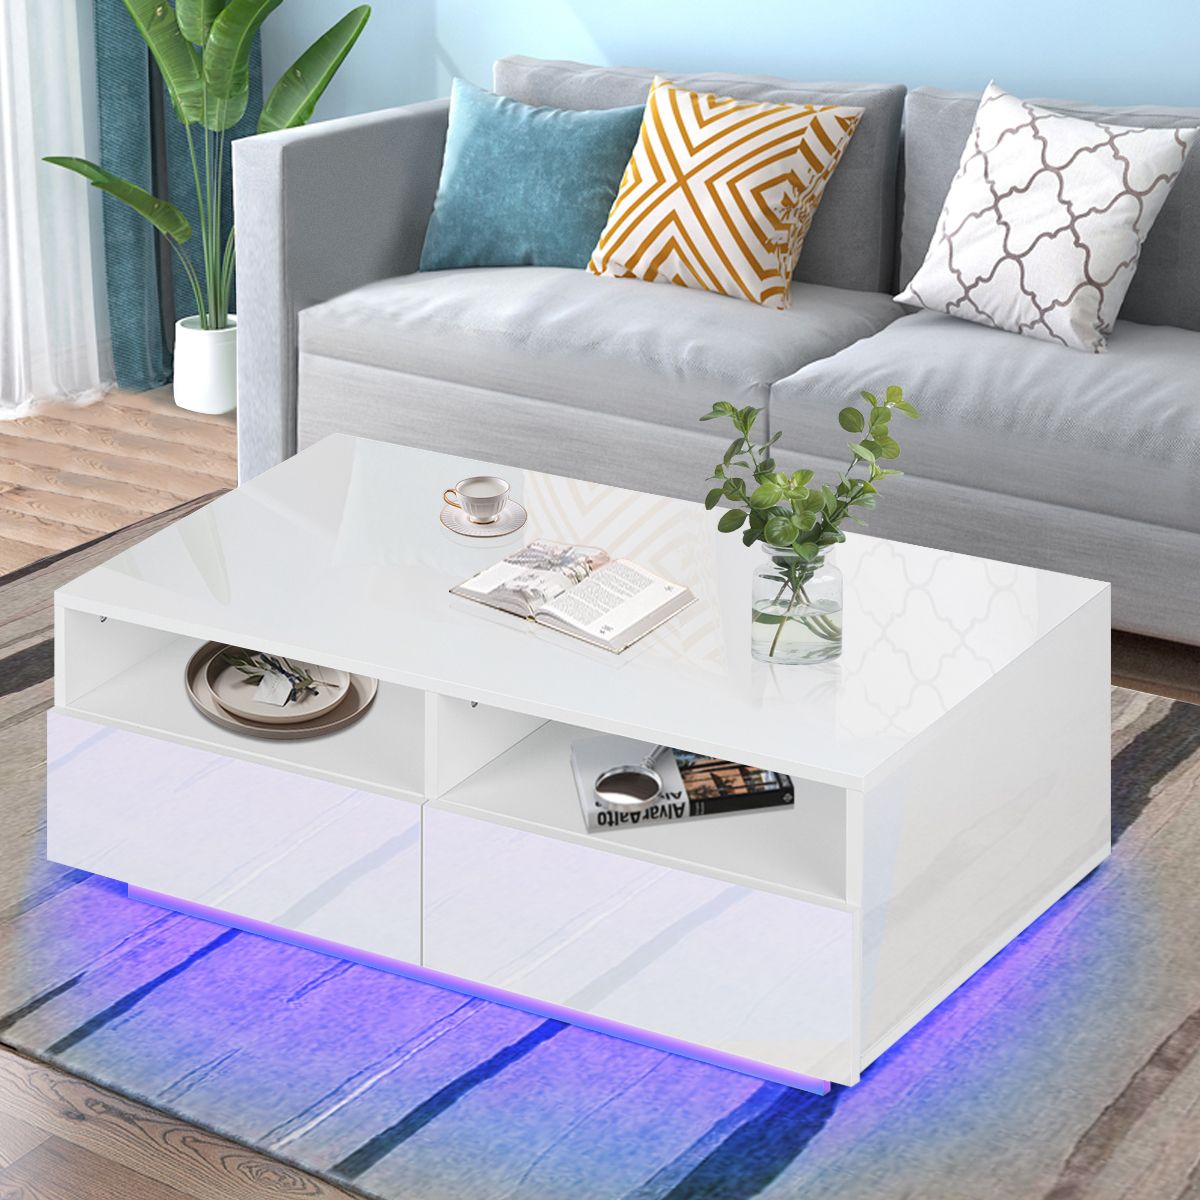 Led Coffee Tables With 4 Drawers Inside 2020 Hommpa High Gloss Led Coffee Table W/ 4 Drawers Living Room With Remote (View 5 of 15)